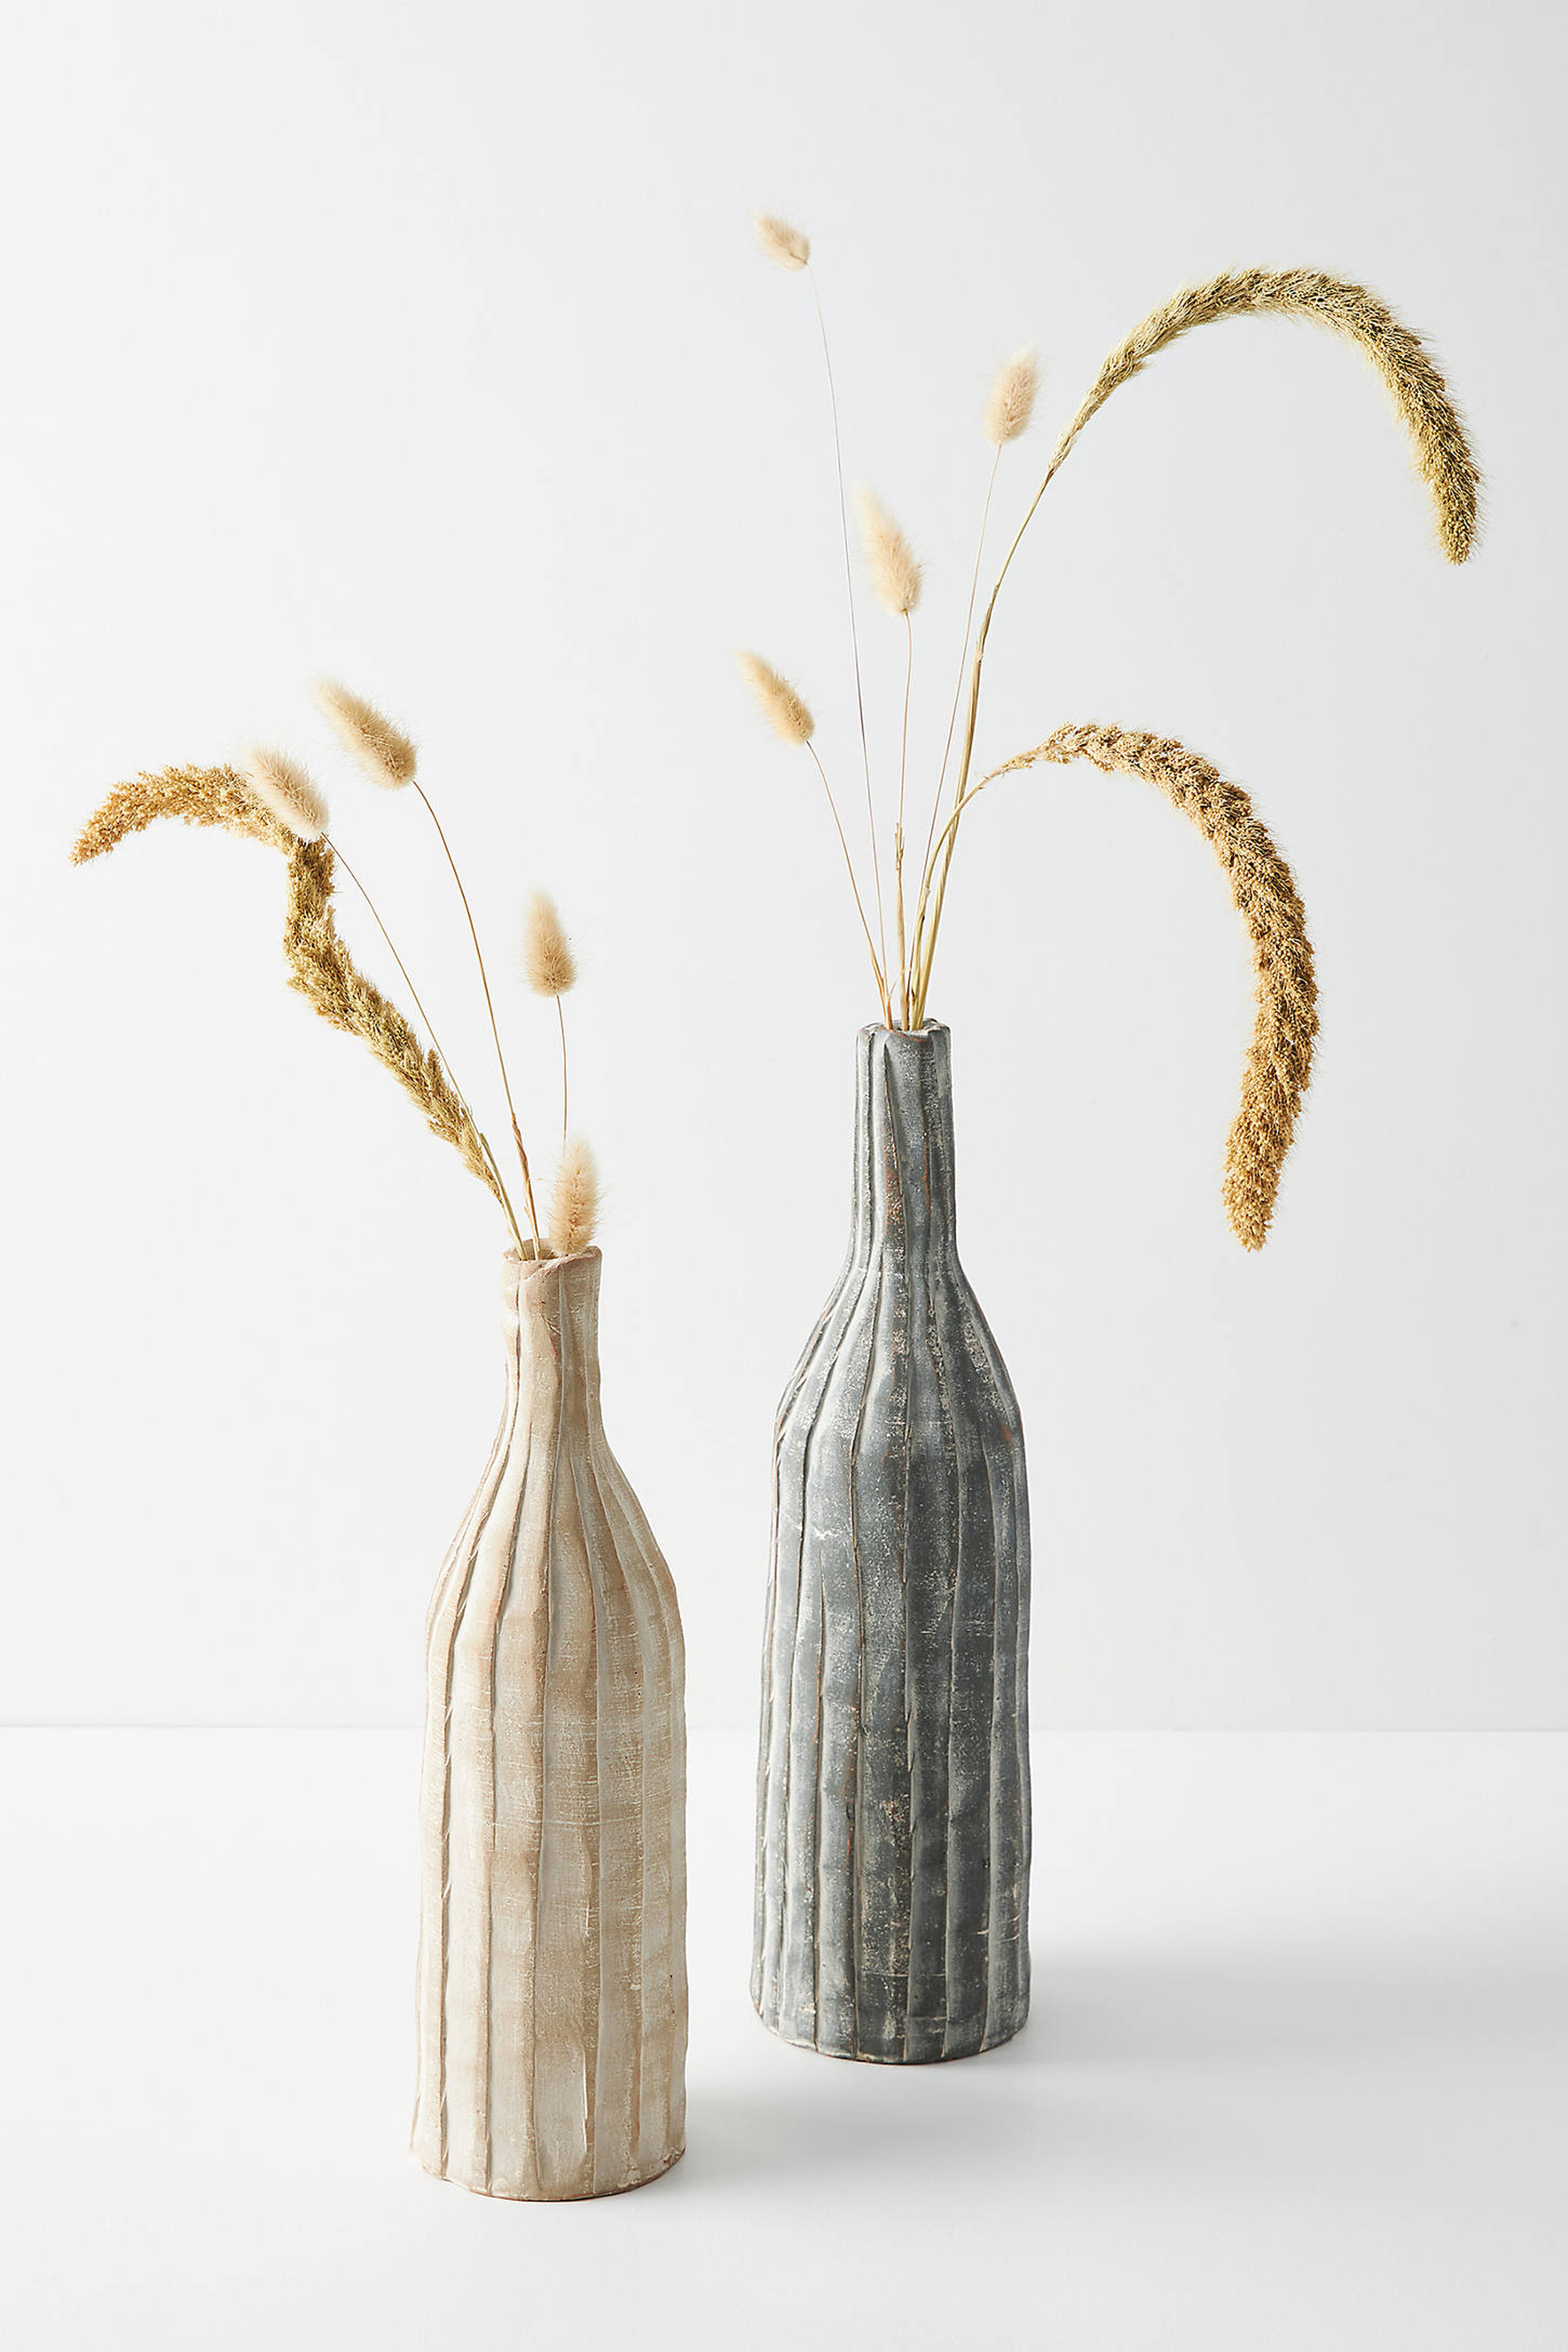 Ribbed Clay Vases, Set of 2 - Anthropologie